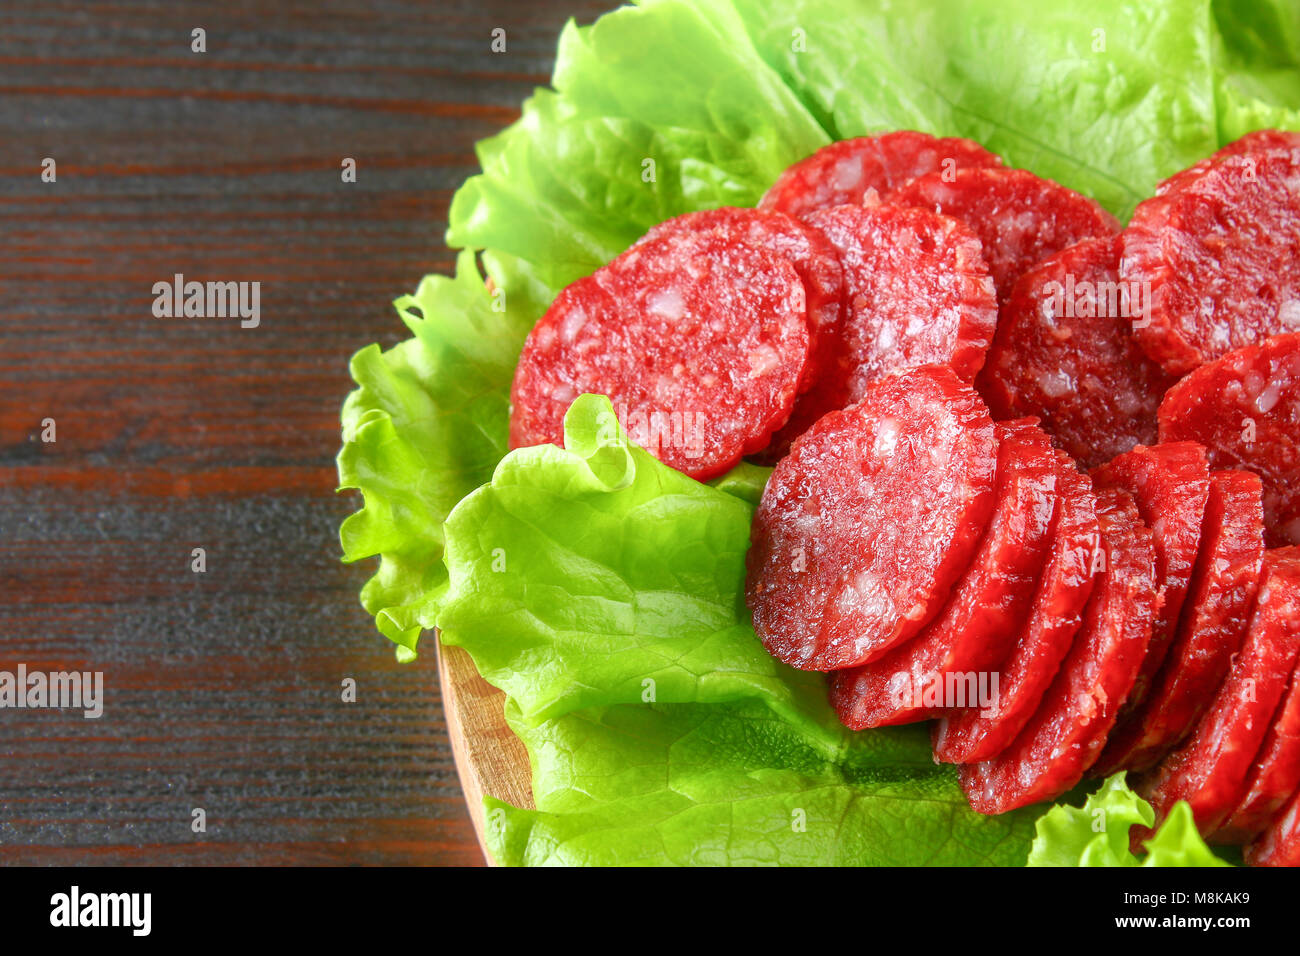 Smoked sausage, salami chopped in slices on a salad on a wooden circular cutting board on a brown table Stock Photo